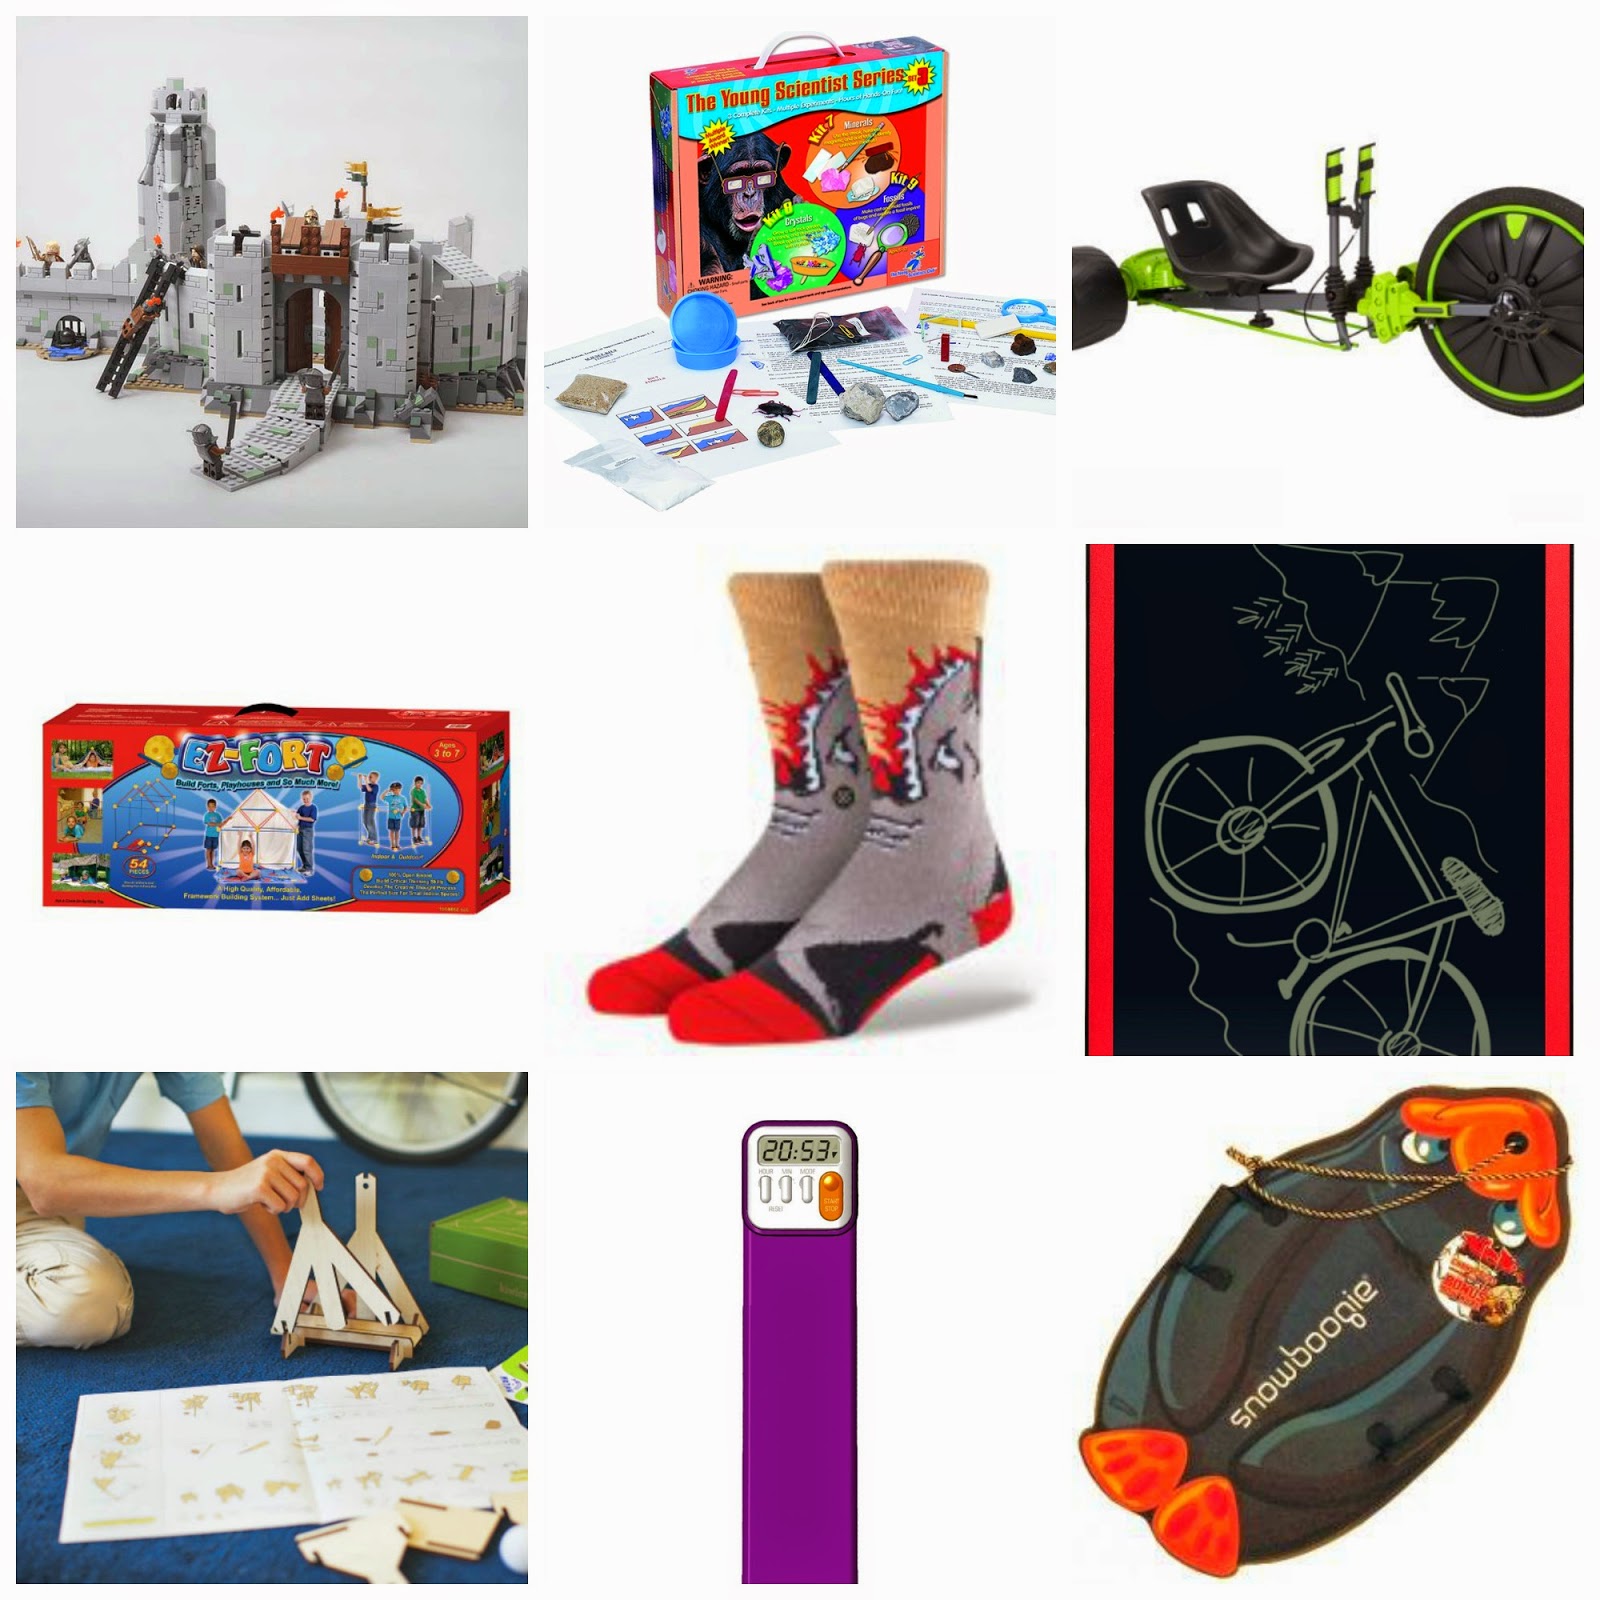 60 + Great Gifts for Boys (Electronic Free!) - Brooke Romney Writes